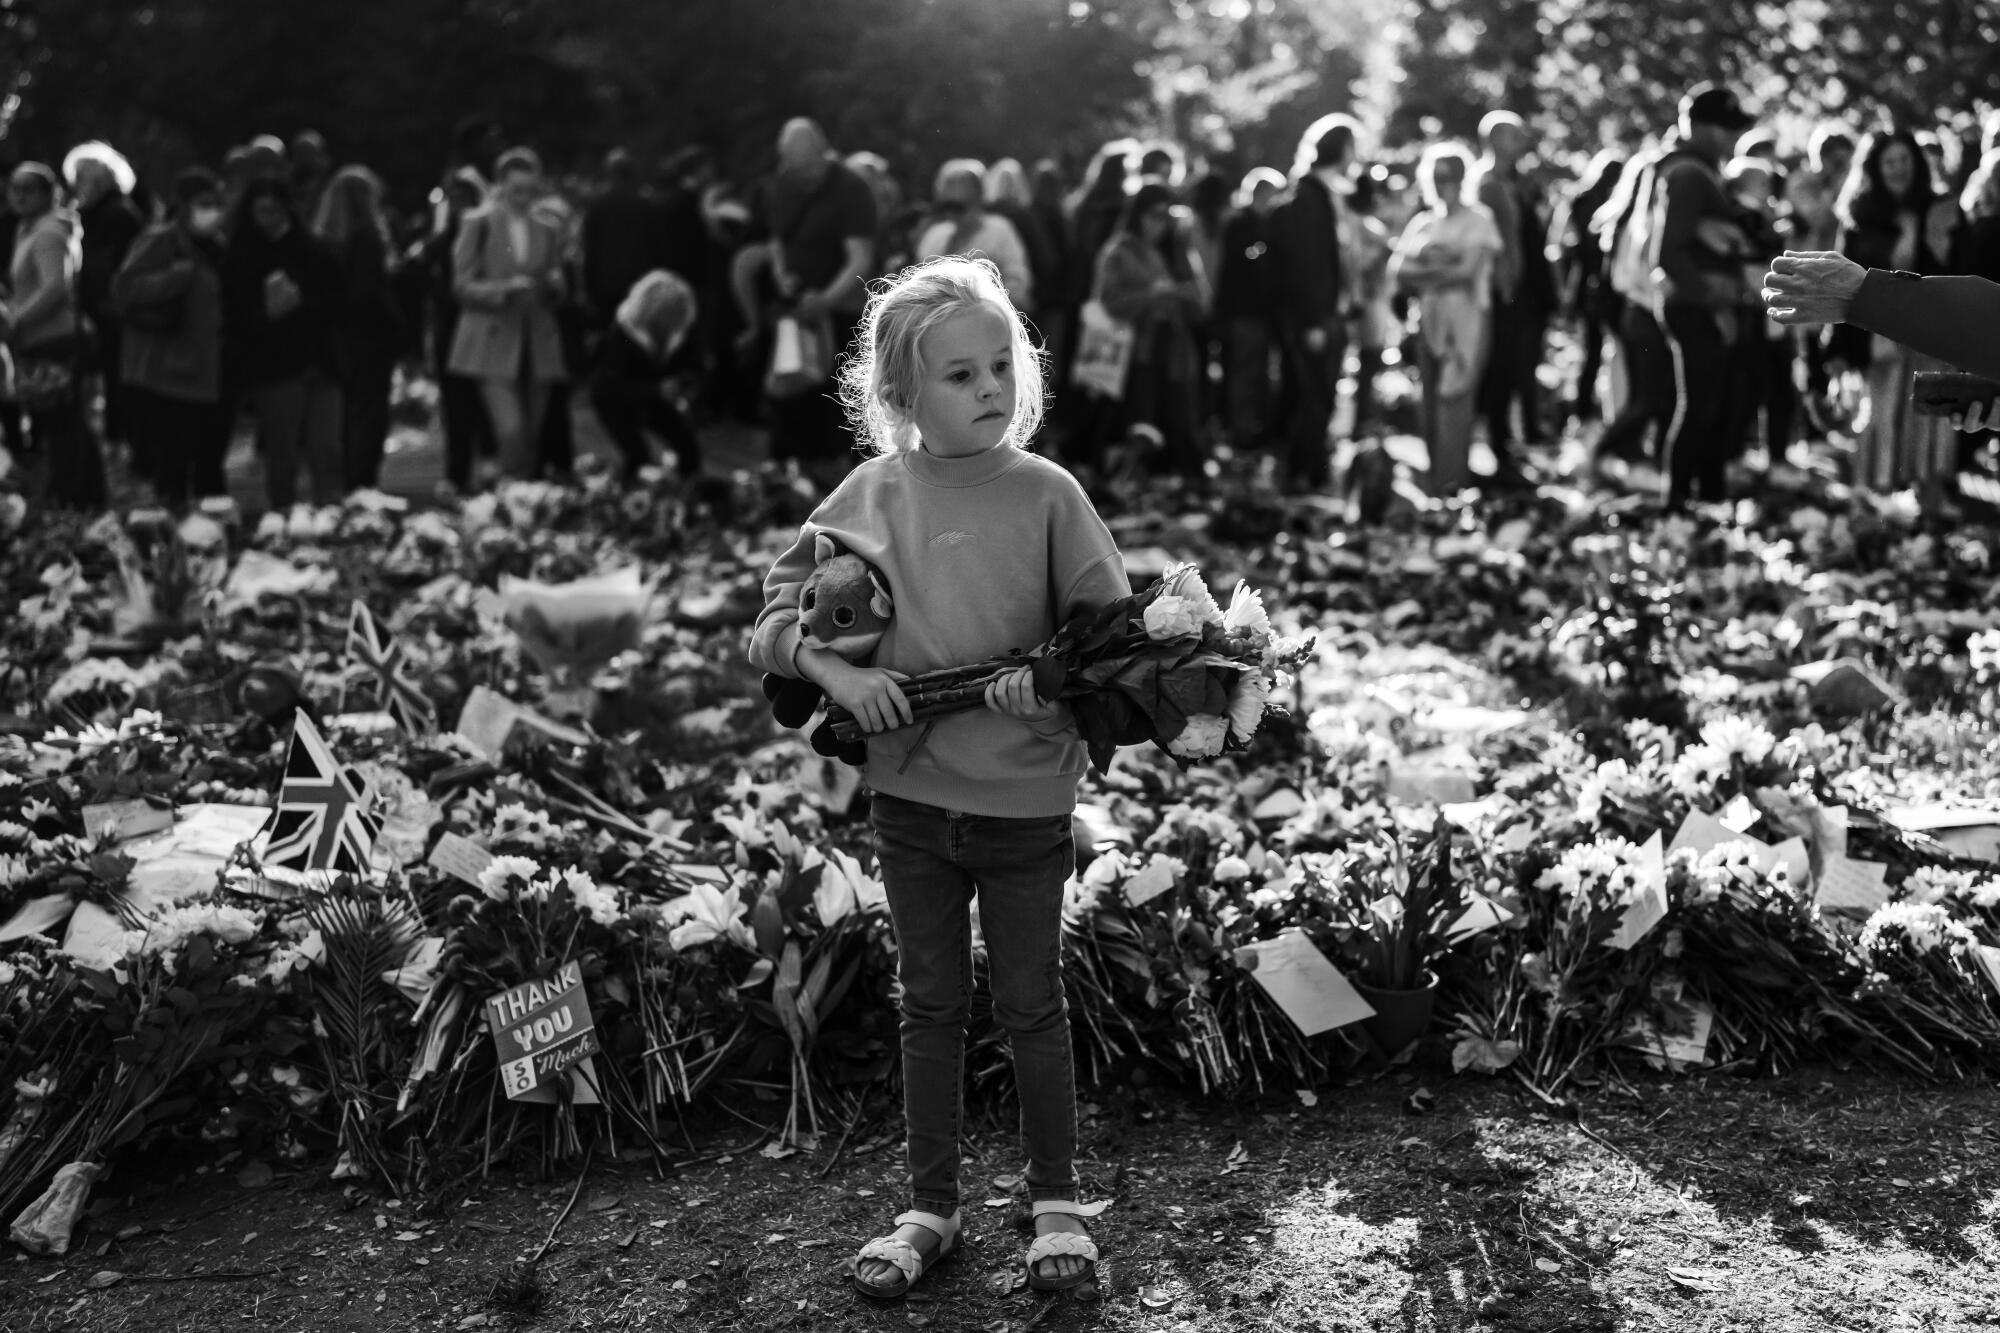 A young girl carry's flowers and a stuffed animal in Green Park